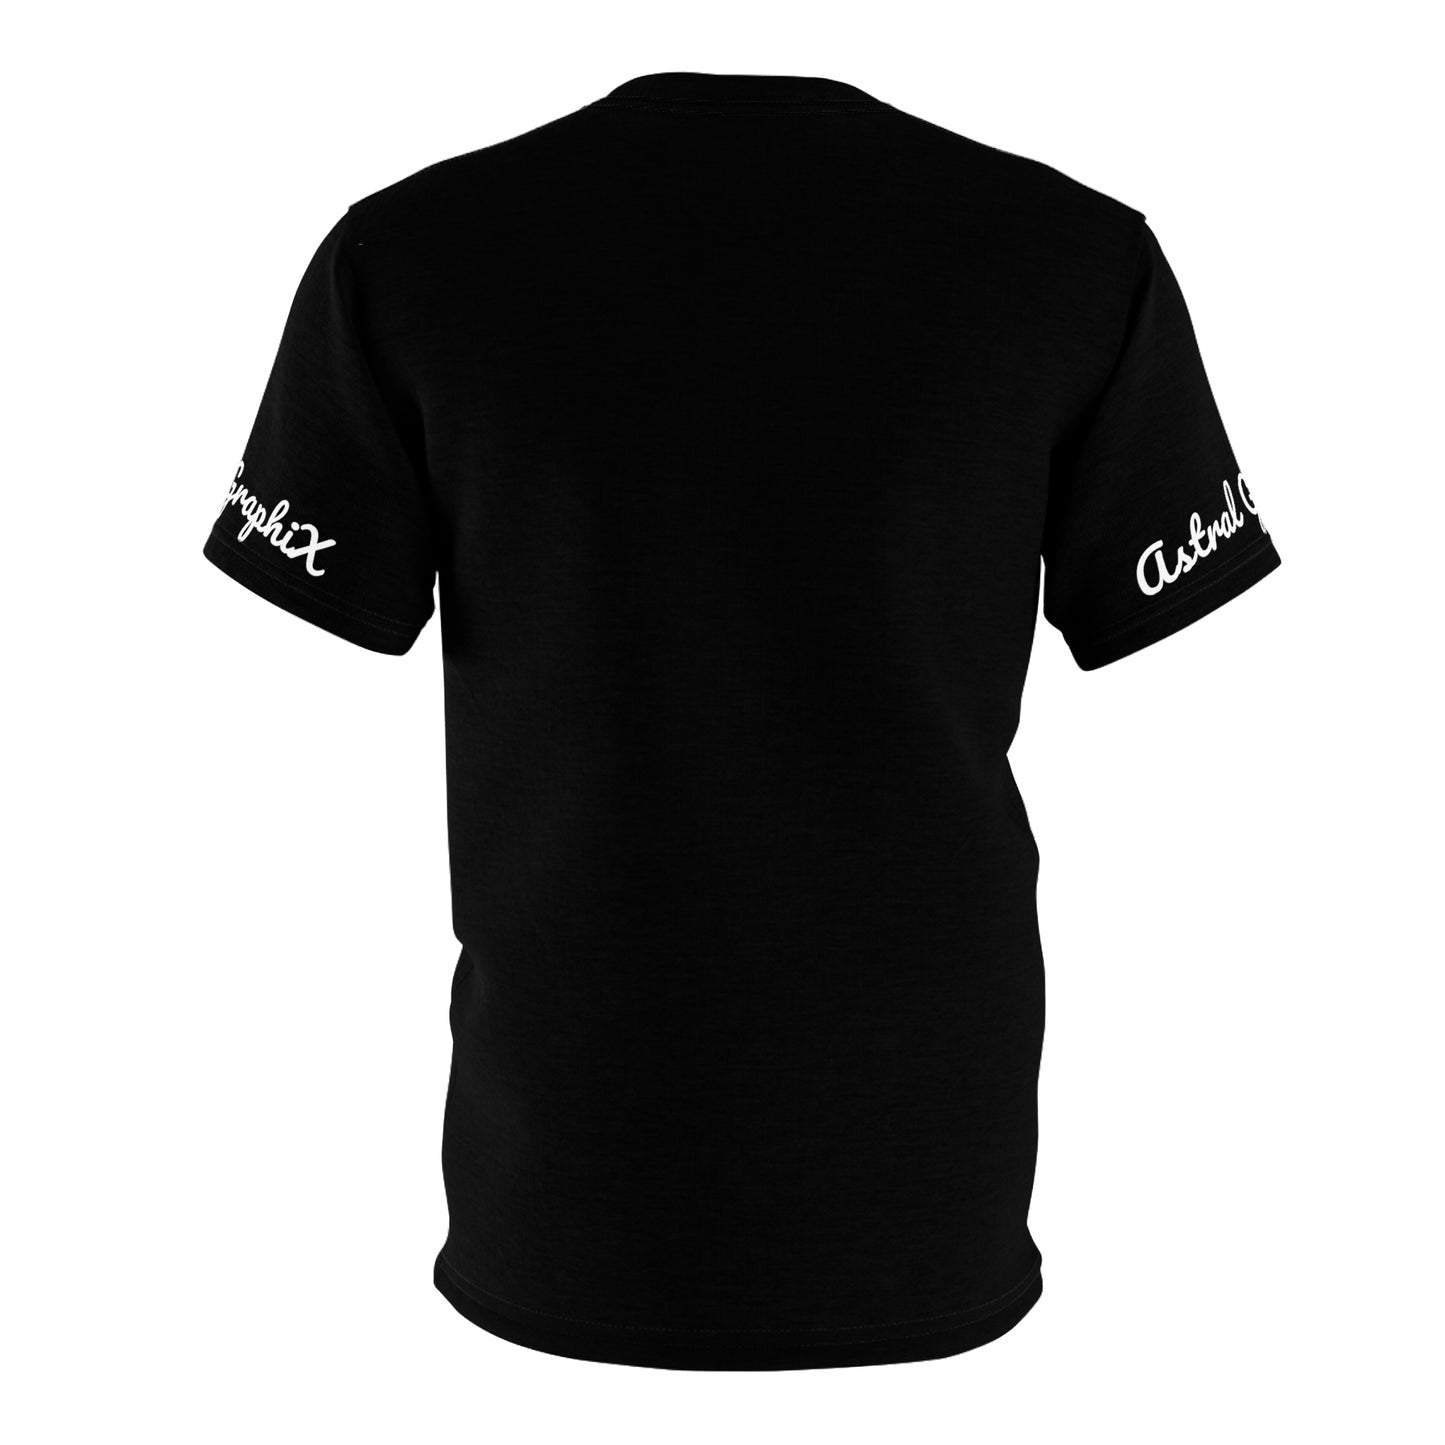 Word Art Collection - Unisex AOP Cut & Sew Tee - The Gym v1 in Black